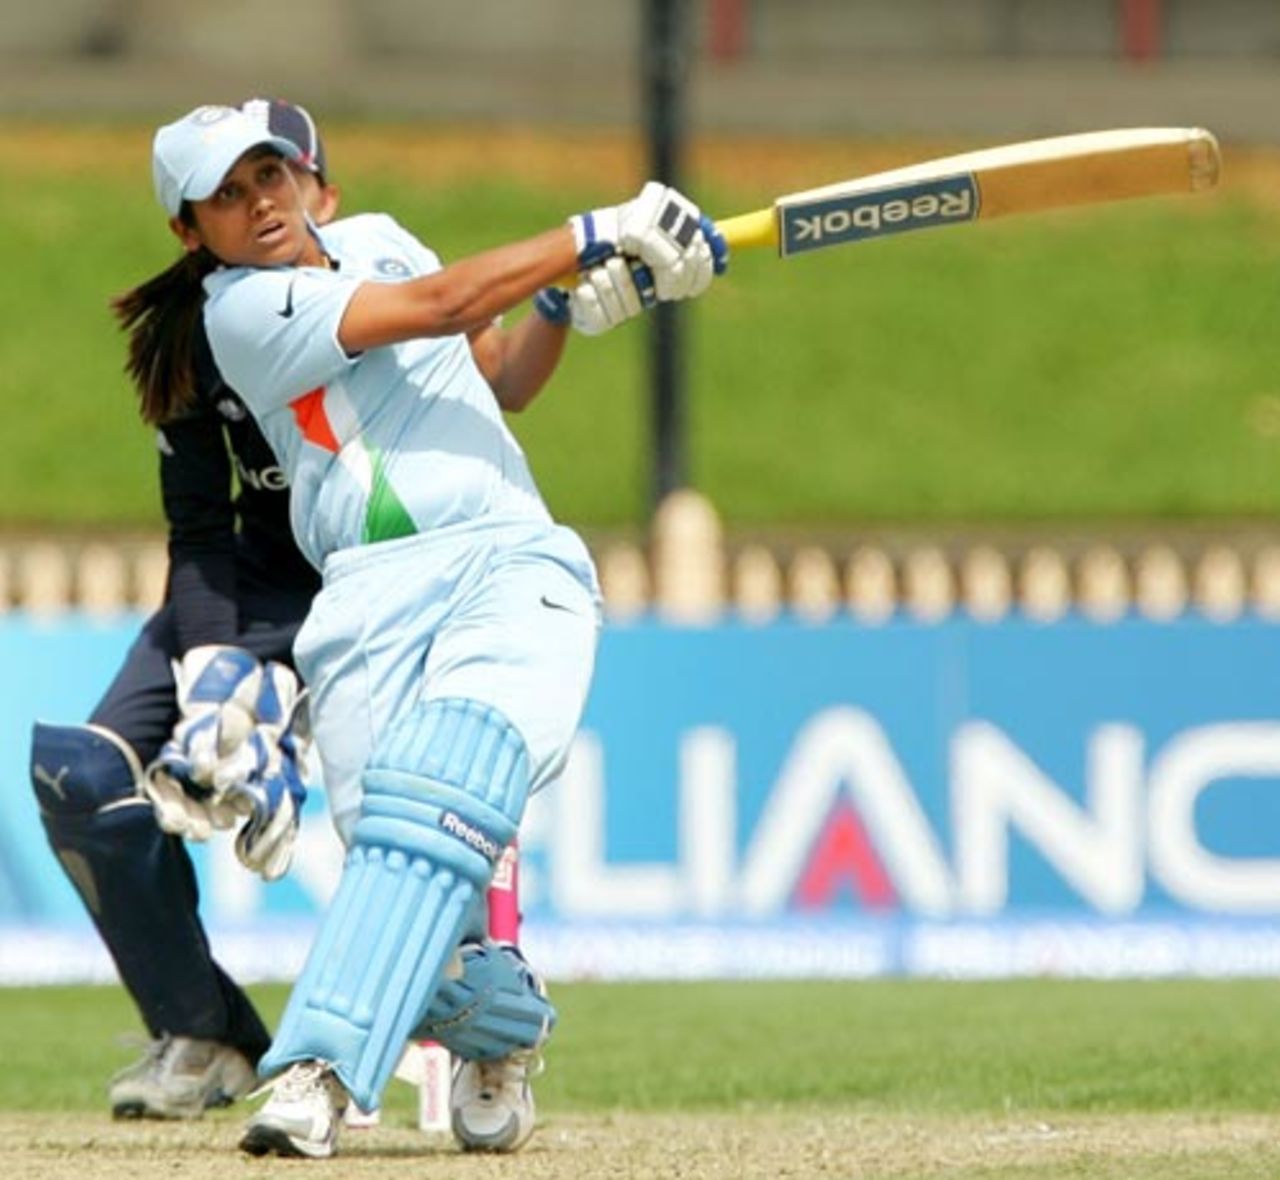 Amita Sharma boosted India's total with a 24-ball 33, England v India, Group B, women's World Cup, Sydney, March 10, 2009
